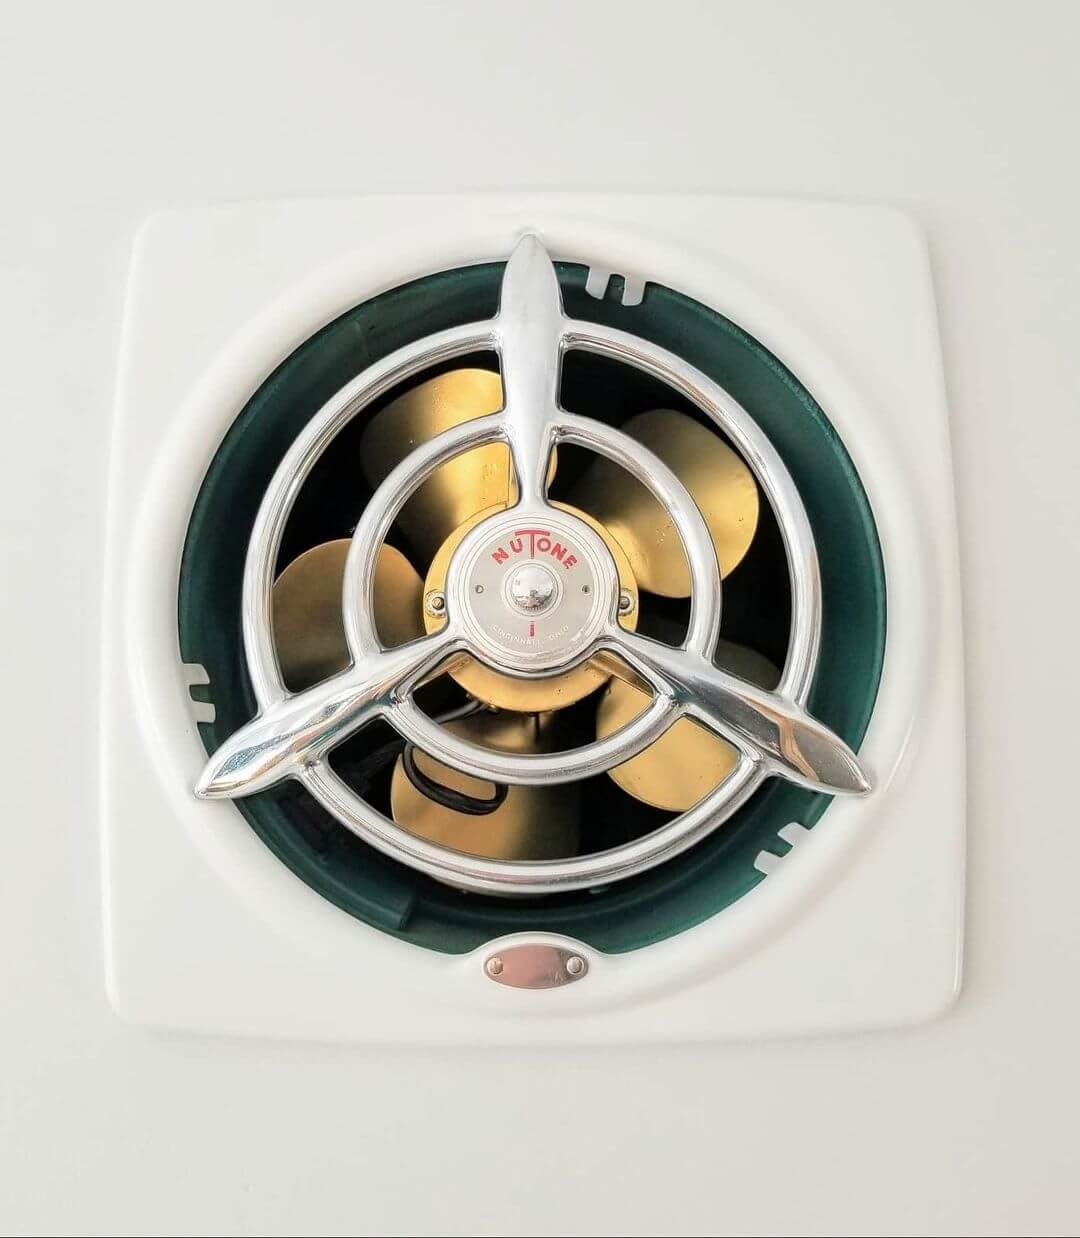 How to Remove and Replace Light Bulb in NuTone Bathroom Exhaust Fan